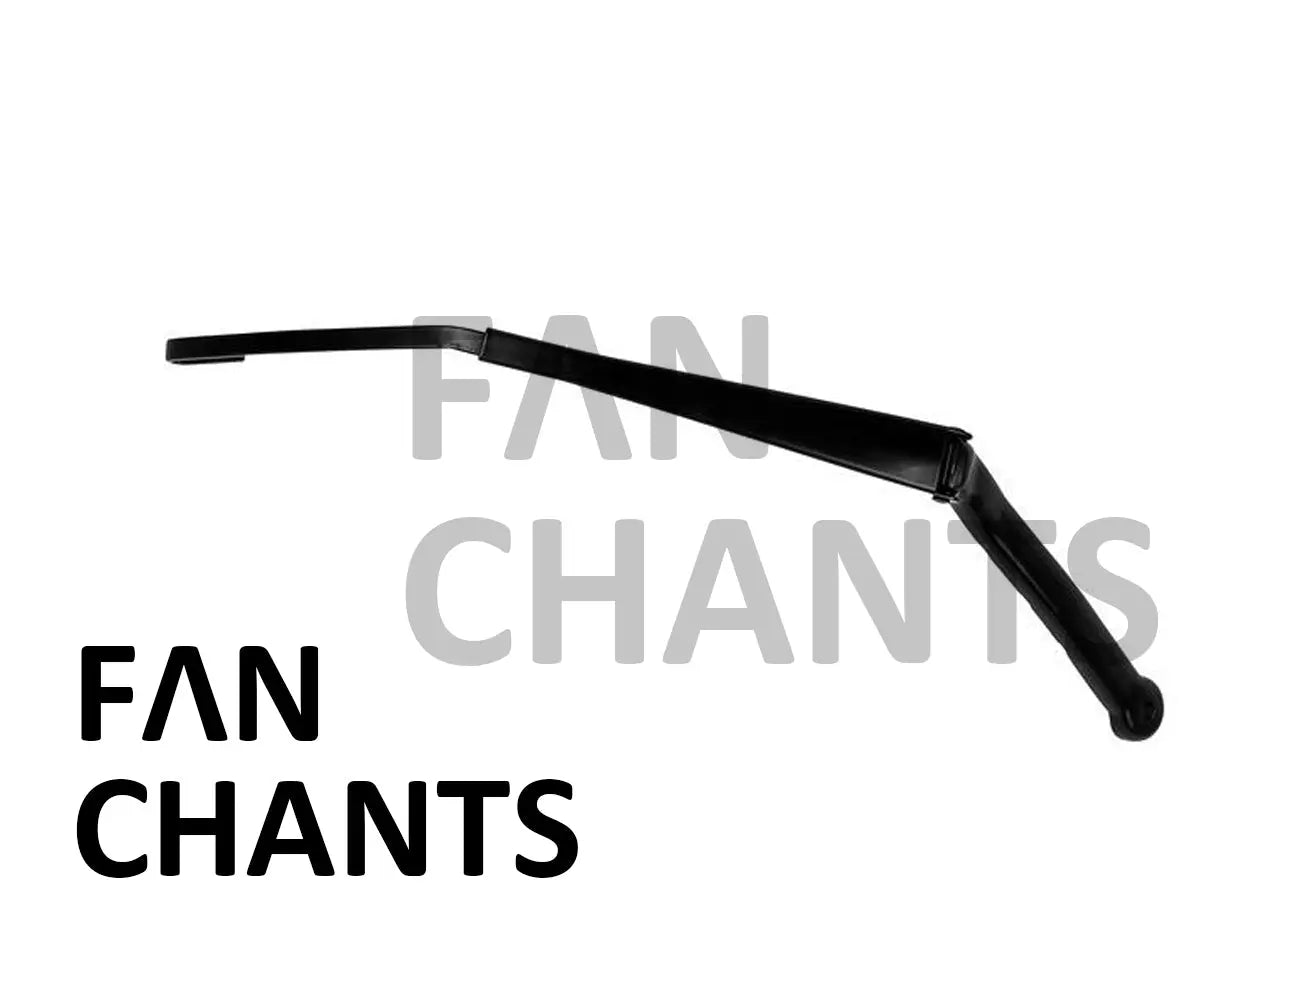 FANCHNATS 1864620 1358285 1380034 1431177 1510660 1543076 1751403 510660 543076 Arm Windscreen Wiper for SCANIA P-G-R-T Series Truck FANCHANTS China Auto Parts Wholesales